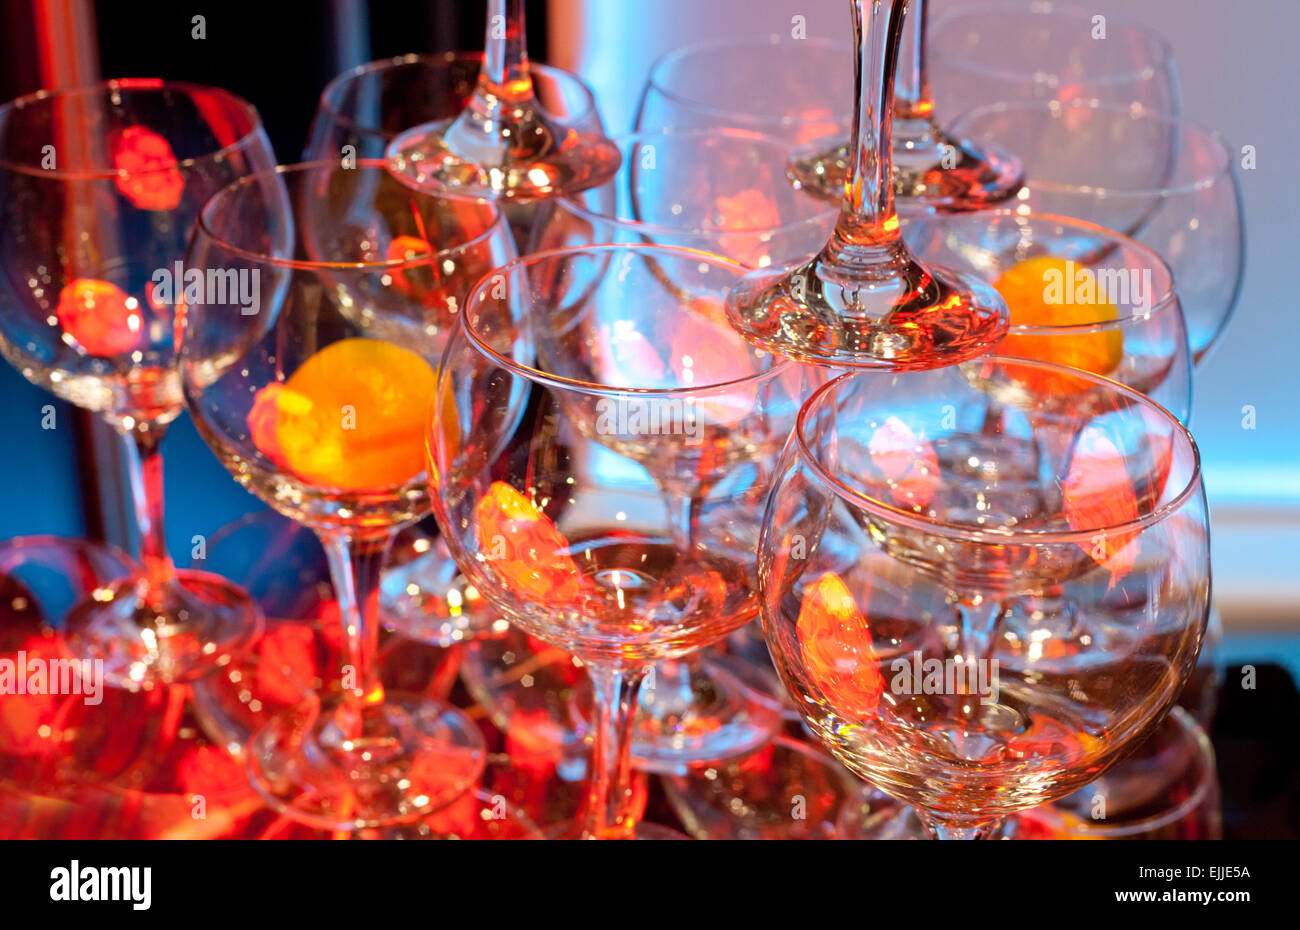 Lots of wine glasses with orange inside, prepared for serve in a bar Stock Photo